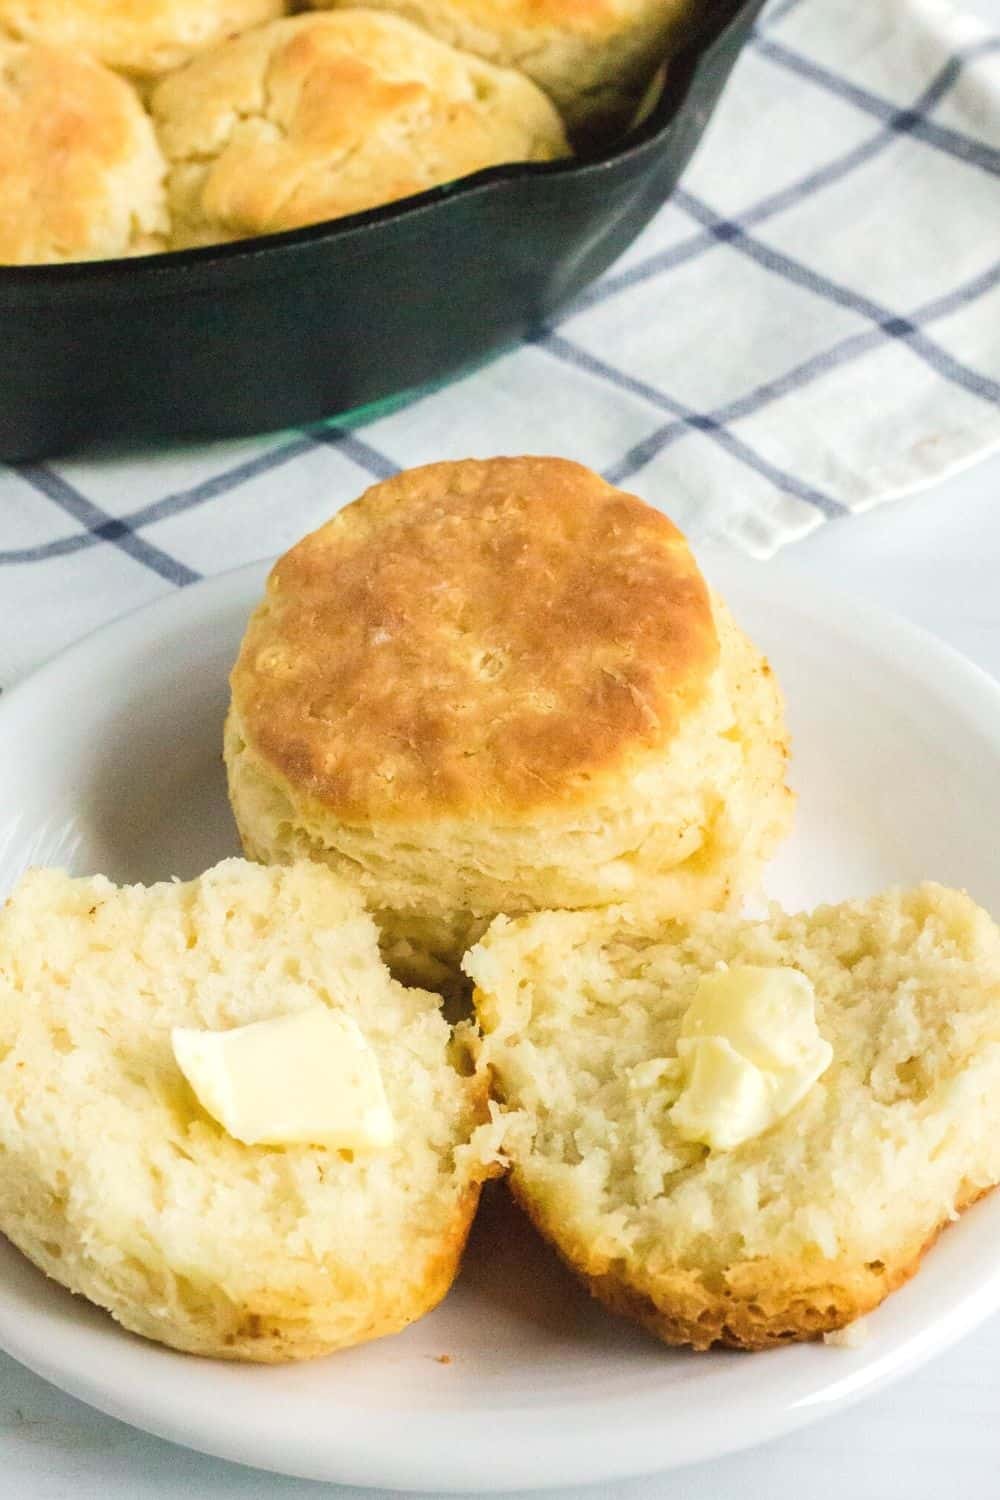 a split biscuit, topped with butter, along with a whole biscuit on a white plate. A cast iron pan of homemade biscuits is in the background.